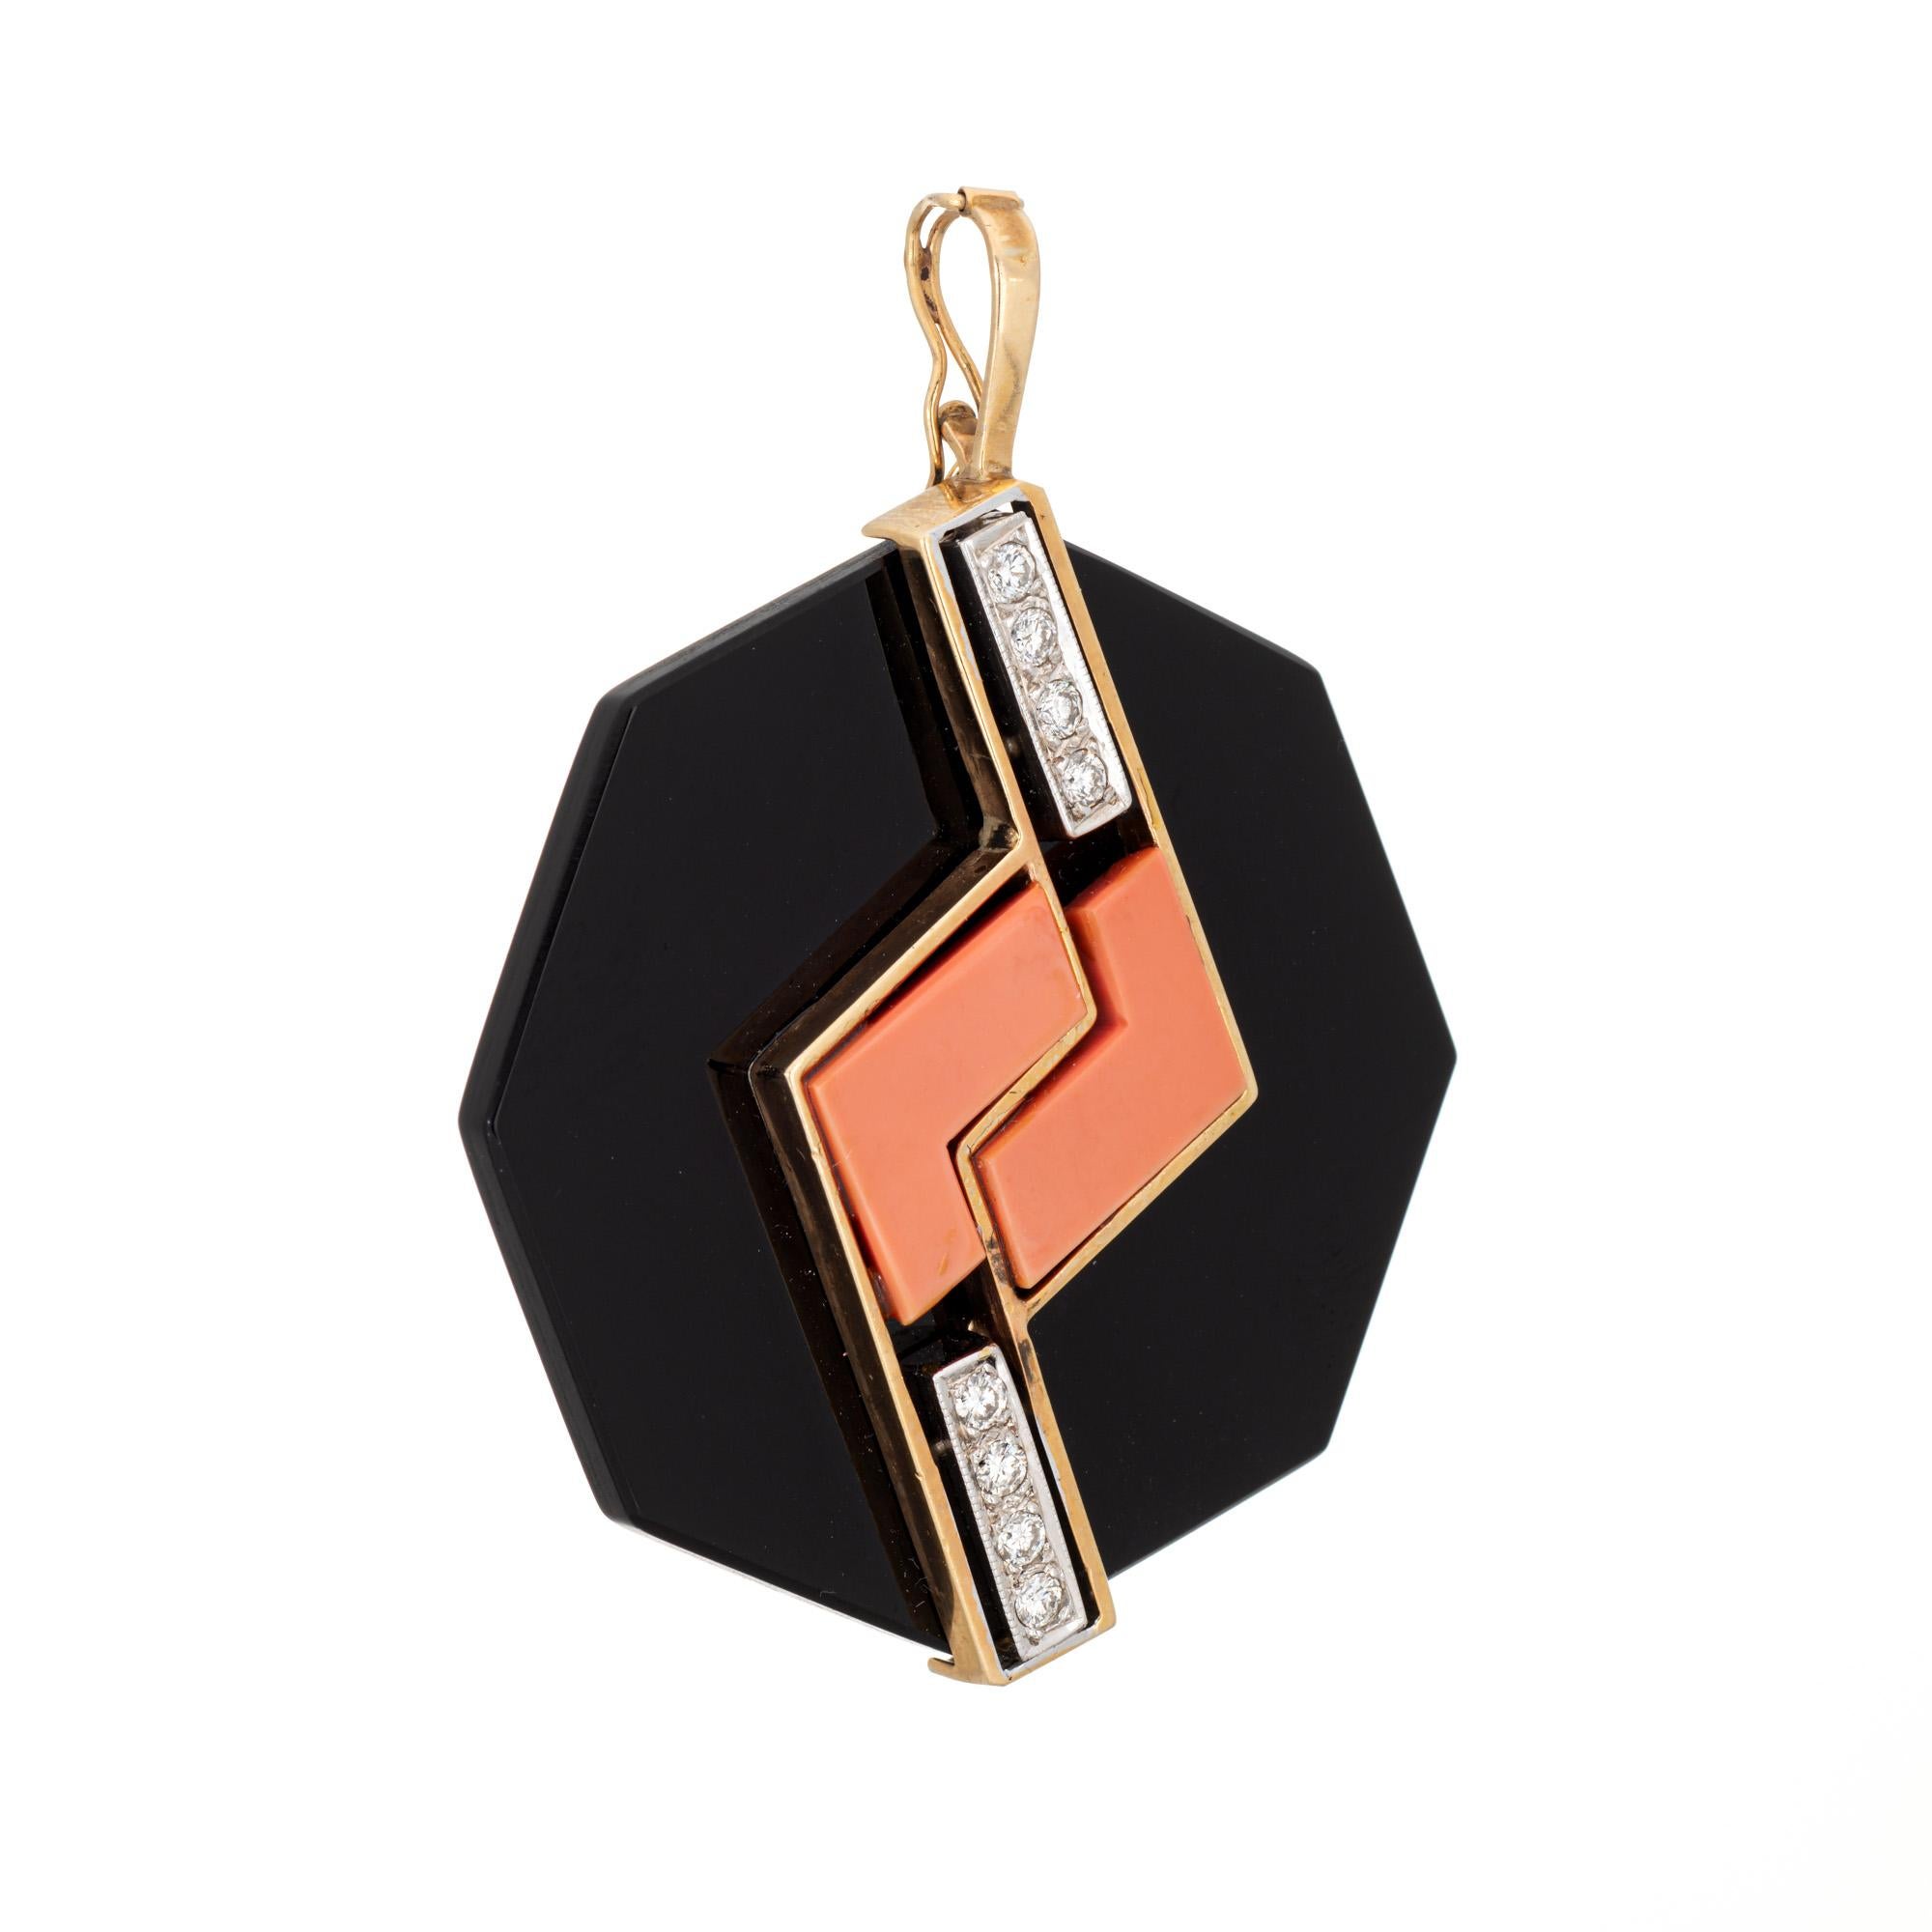 Finely detailed onyx, coral and diamond pendant crafted in 14 karat yellow gold (circa 1970s). 

Onyx measures 1.75 inches. Coral measures 14mm x 5mm. Eight diamonds total an estimated 0.16 carats (estimated at H-I color and VS2-SI2 clarity). The